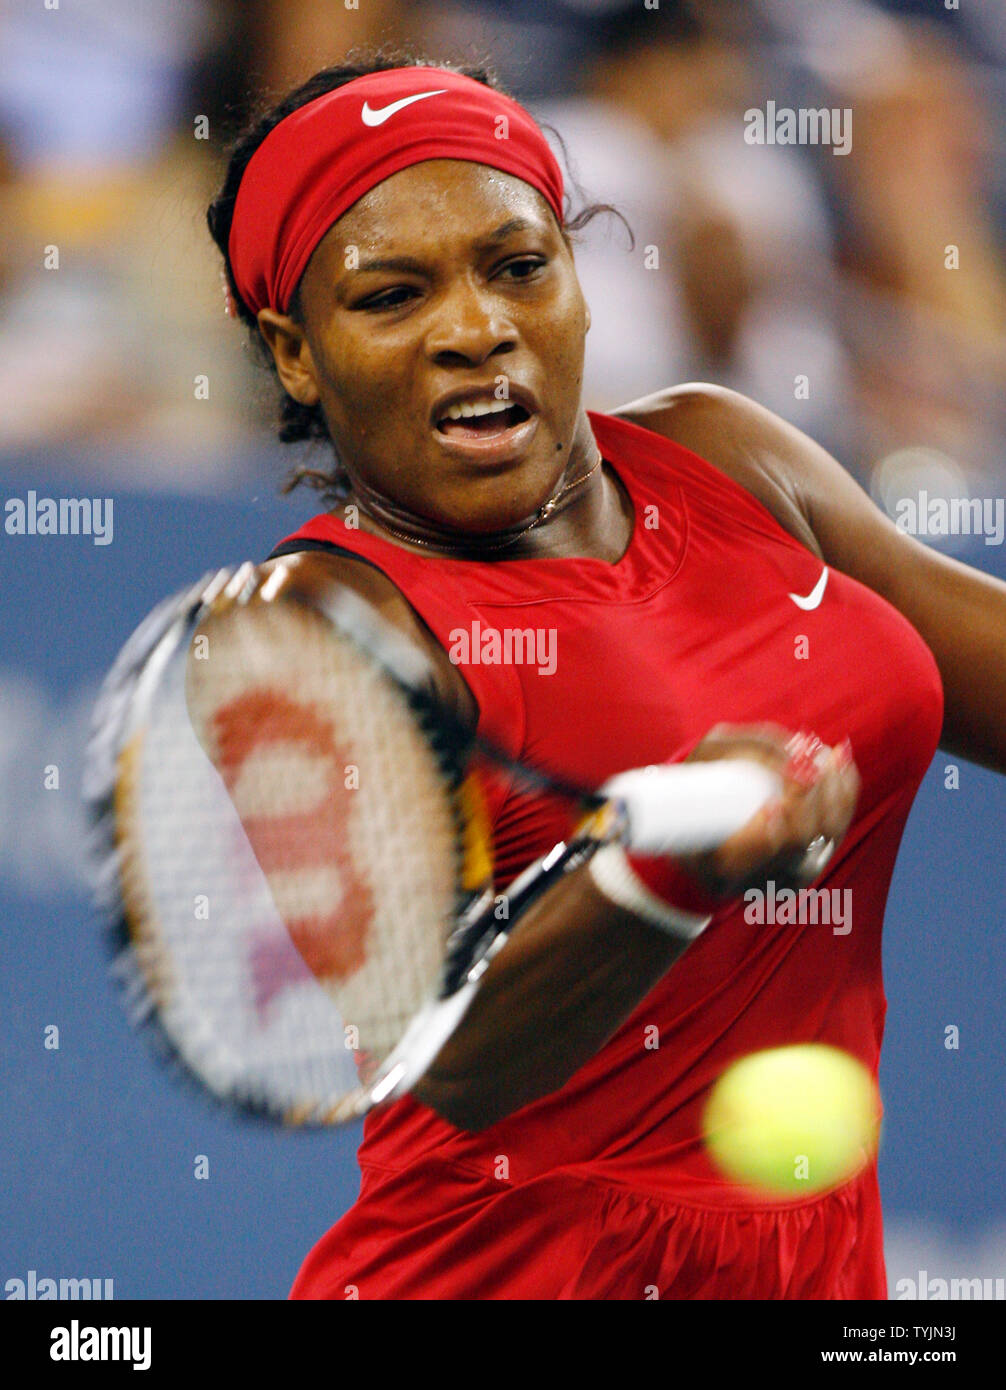 Serena Williams hits a forehand in her match against Severine Bremond on day eight at the U.S. Open Tennis Championships at the U.S. National Tennis Center in Flushing Meadows, New York on September 1, 2008. Williams defeated Bremond 6-2 6-2.       (UPI Photo/John Angelillo) Stock Photo